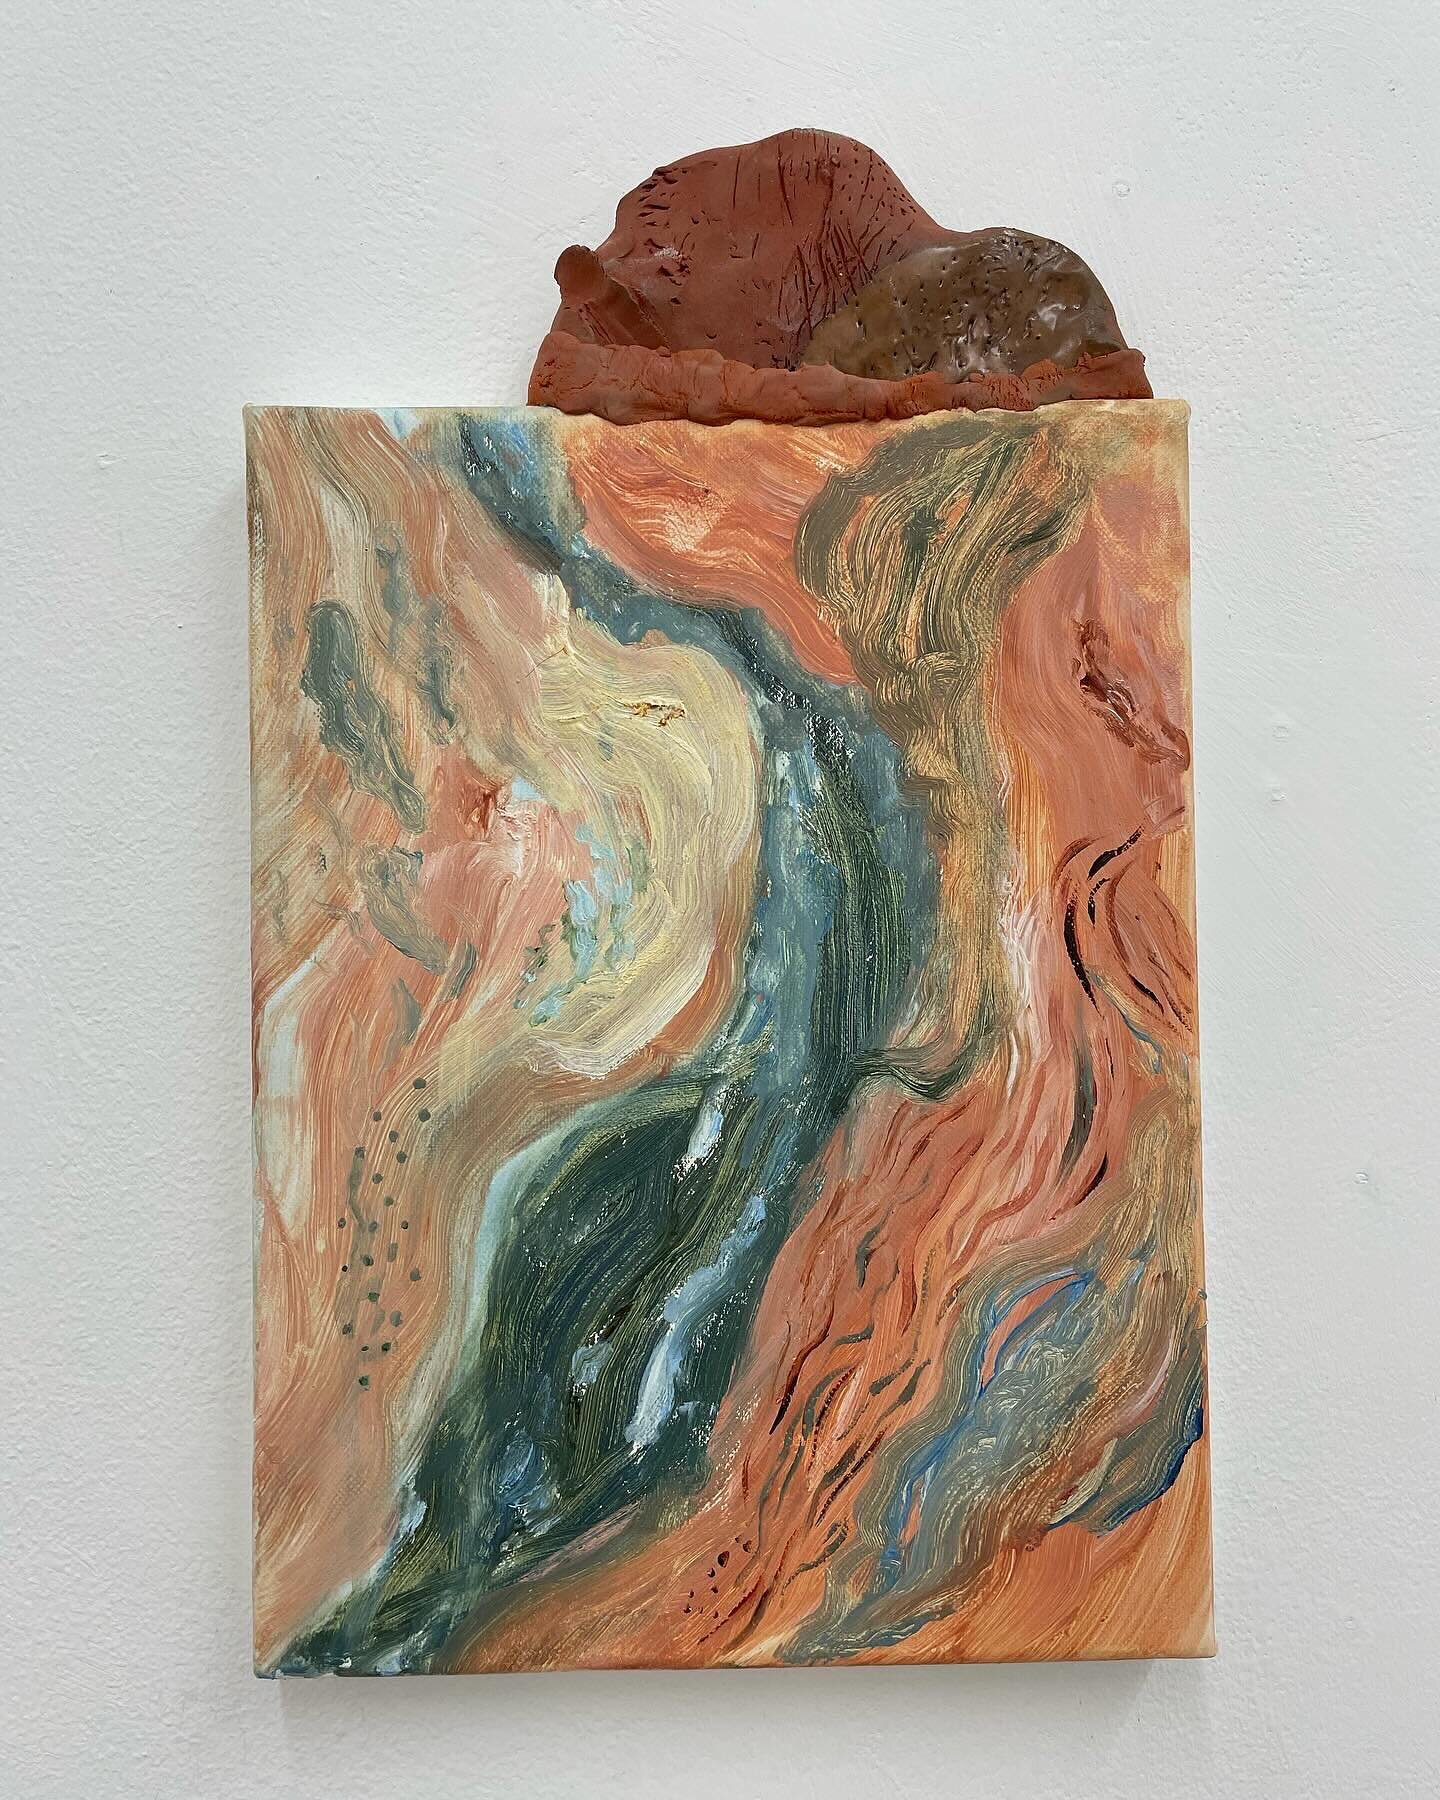 *
Multitasking
Eleanor Bedlow / Julie Caves / Geoffrey Chambers / Rebecca Elves
The Lido Stores, Margate
Thursday 21 March - Saturday 6 April

1
Rebecca Elves 
Burrow, 2024
Oil on linen with glazed earthenware fragment, 
30 x 18 cm

2
Rebecca Elves
N